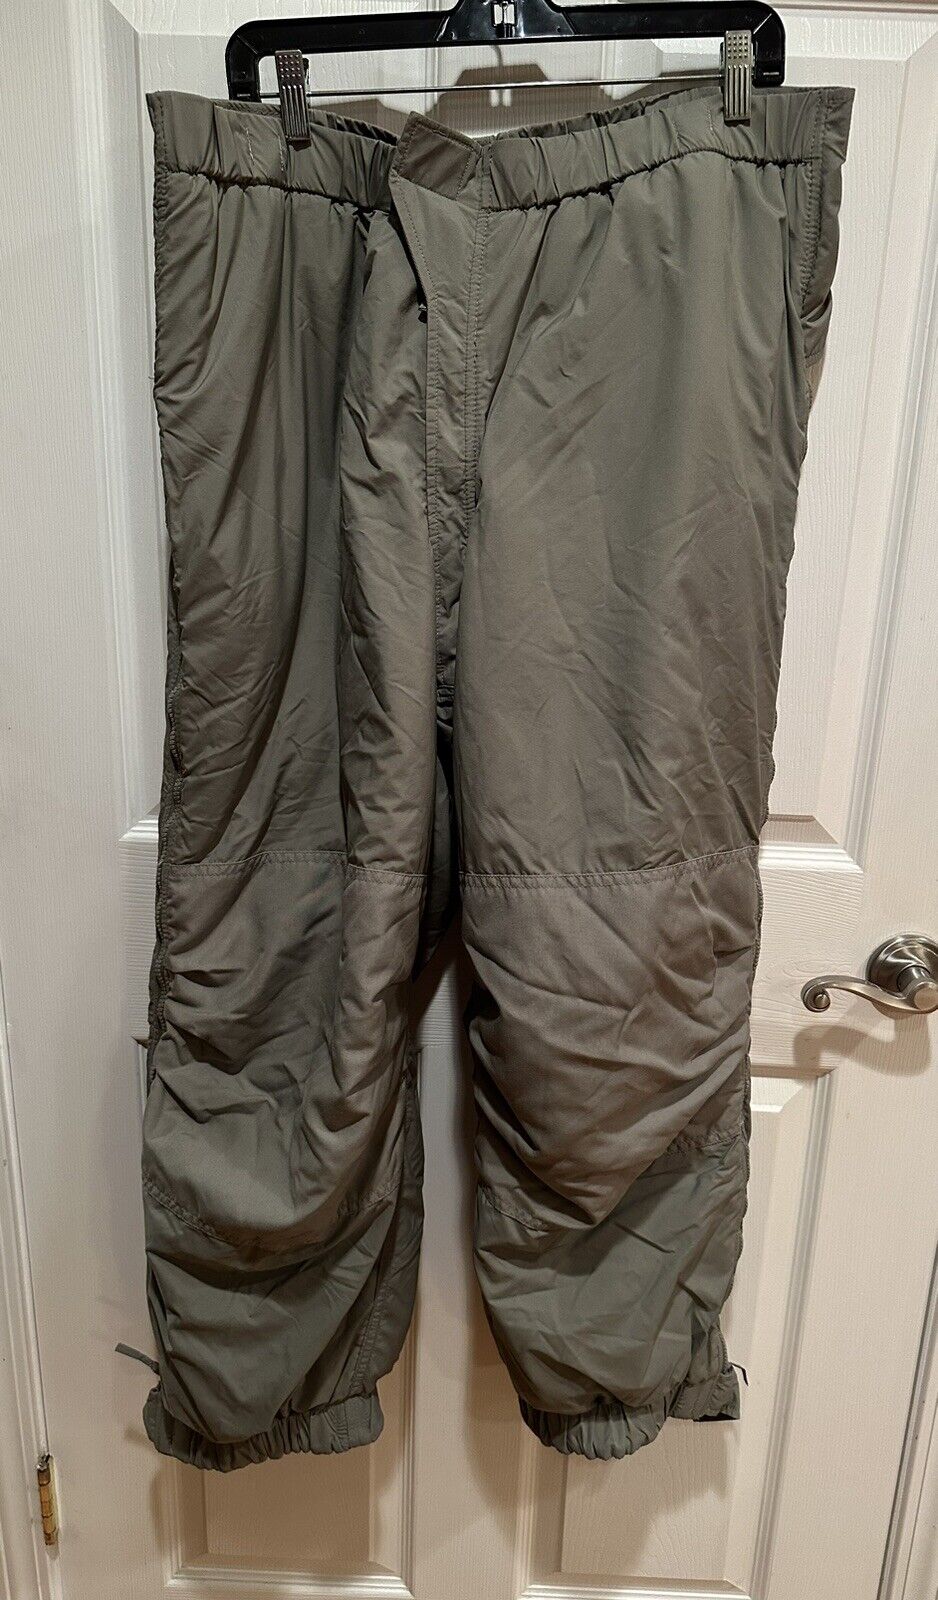 GEN III Primaloft ADS Extreme Cold Weather Army Trouser Pants ECWCS Size Large